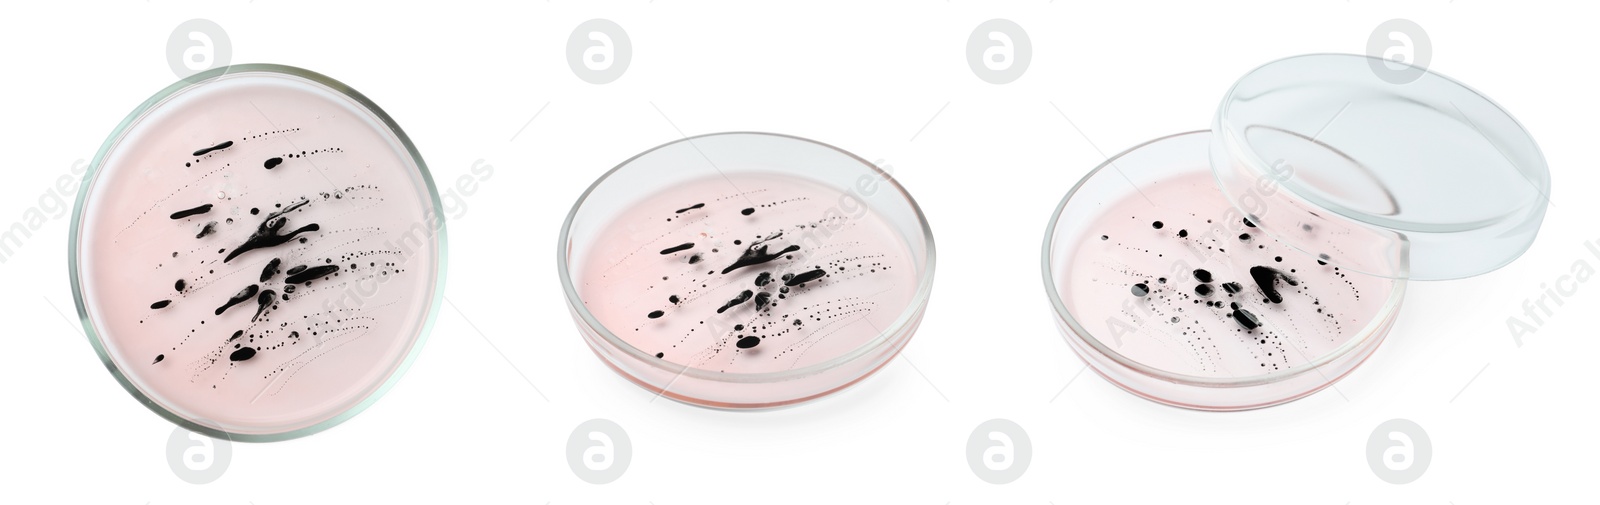 Image of Collage of Petri dish with culture on white background, different angles